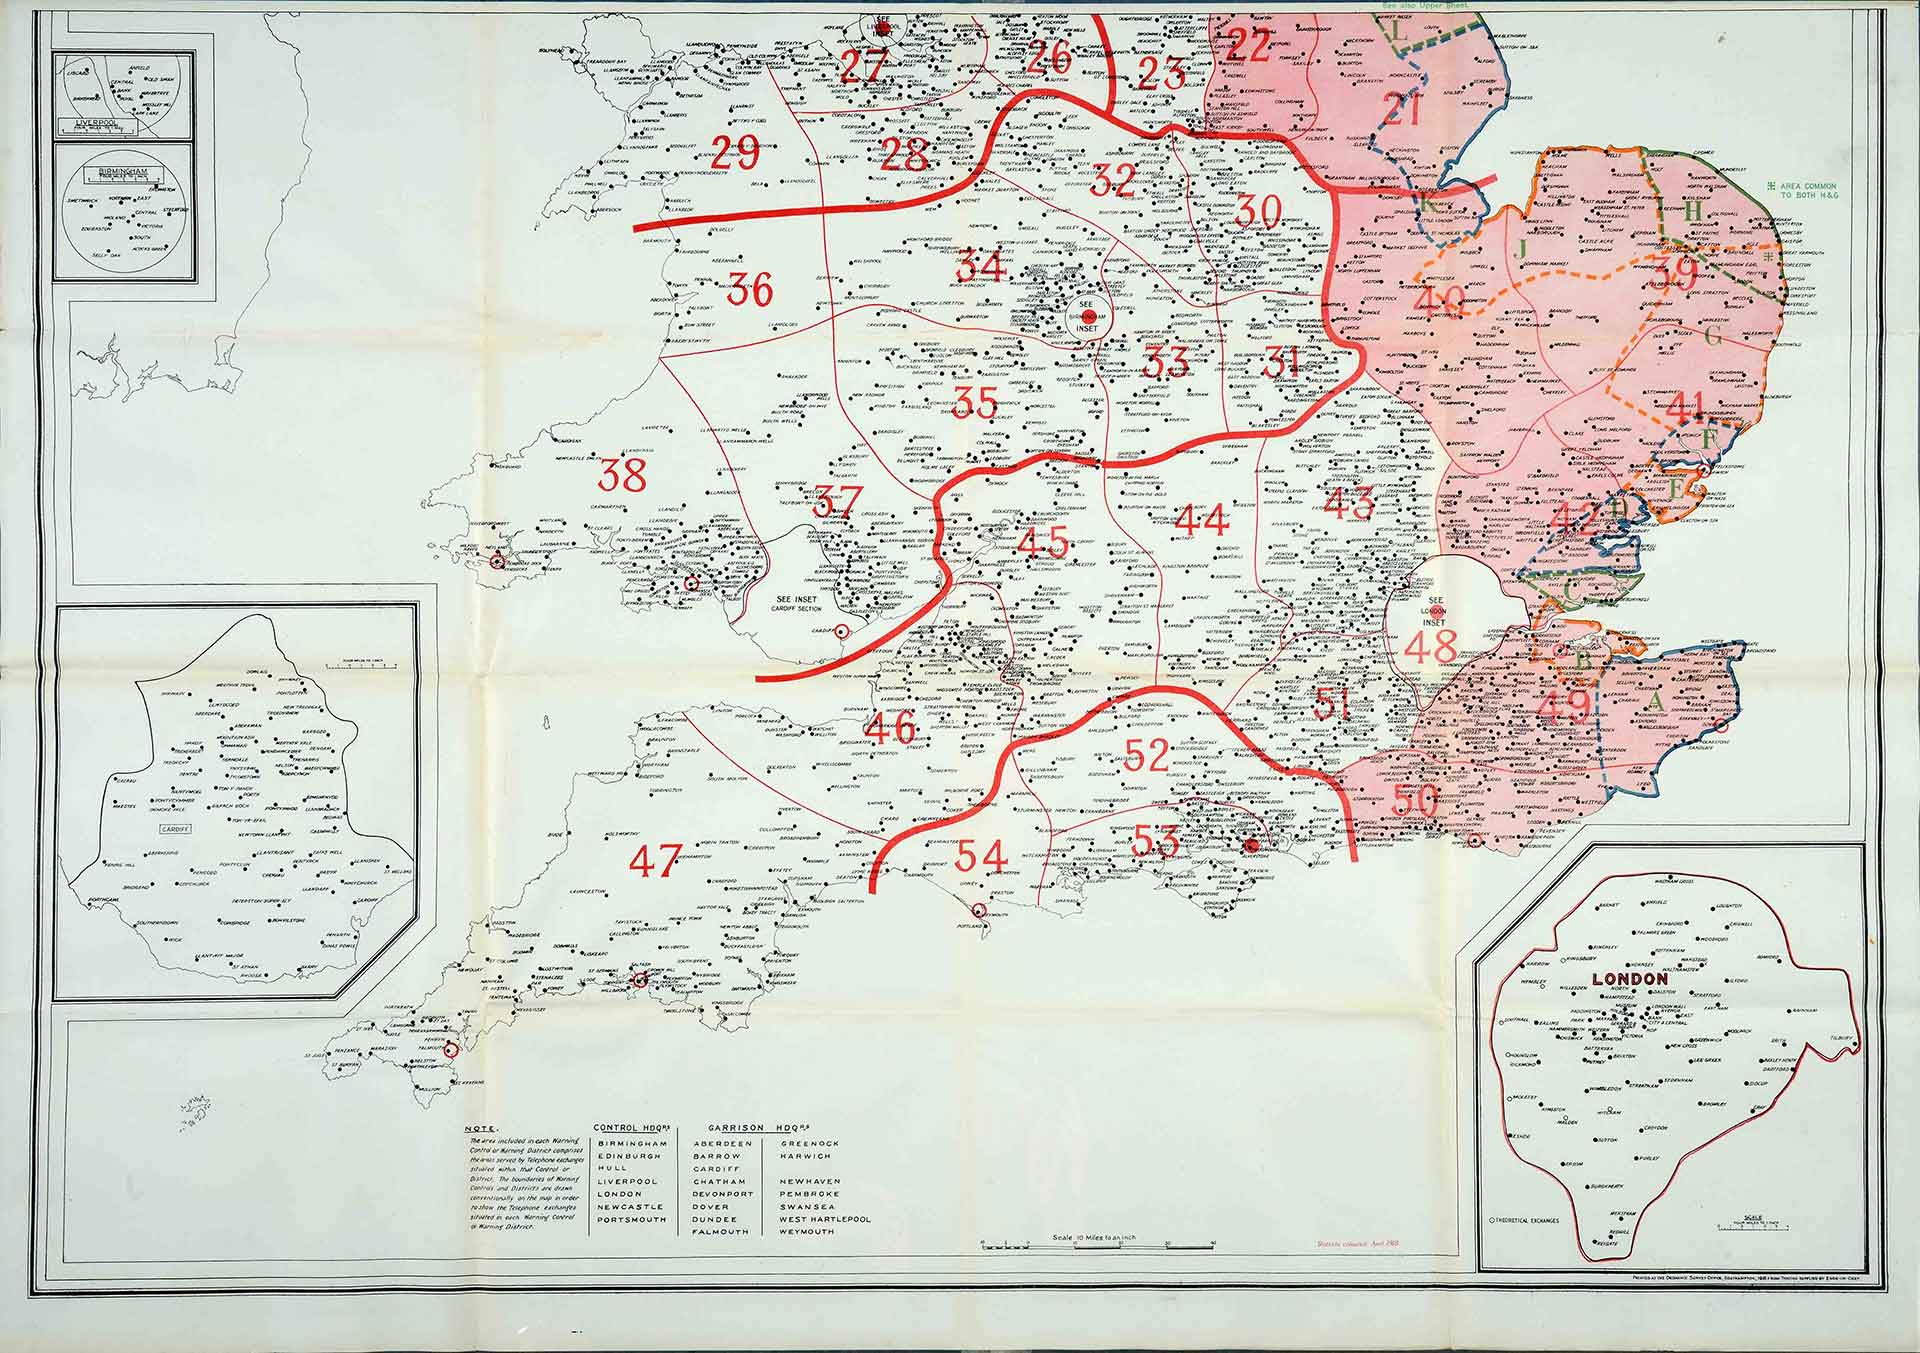 Map indicating (in red) areas for communications cut-off during attack (cat ref: MUN 4/5355